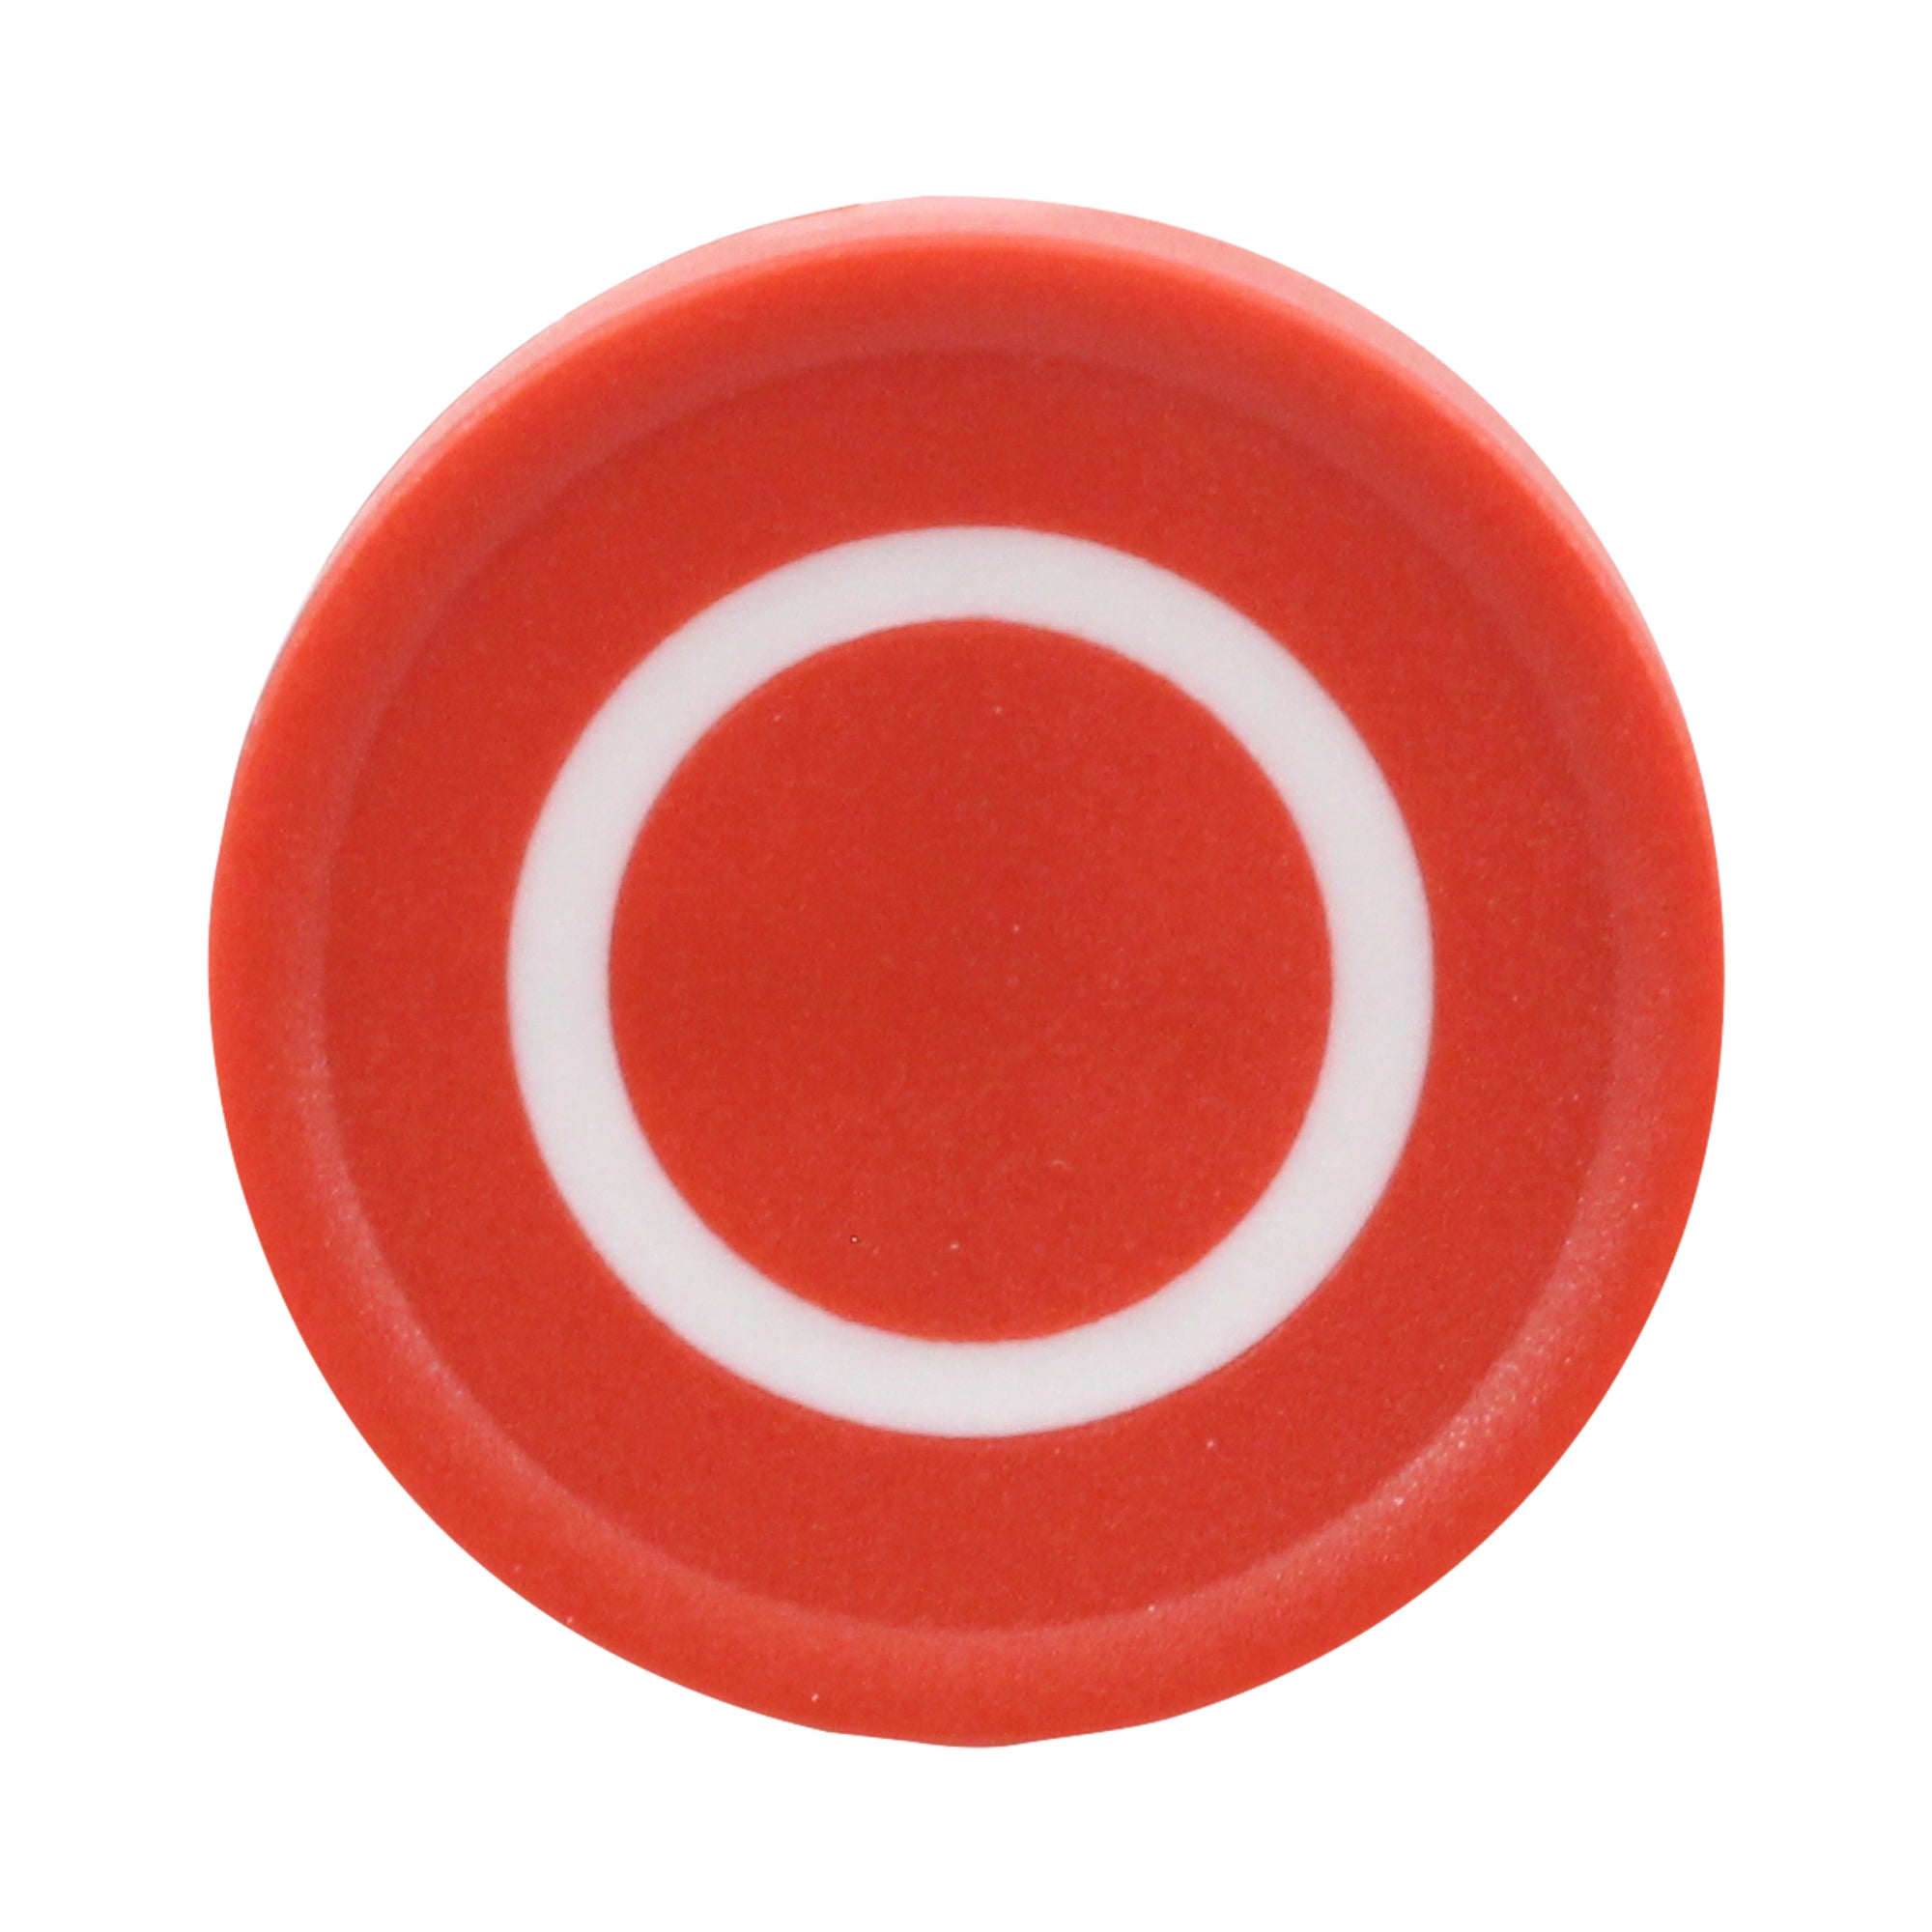 Allen Bradley Group, ALLEN BRADLEY 800F-AE405 EXTENDED PUSH BUTTON MOLDED CAP, SERIES-A, RED